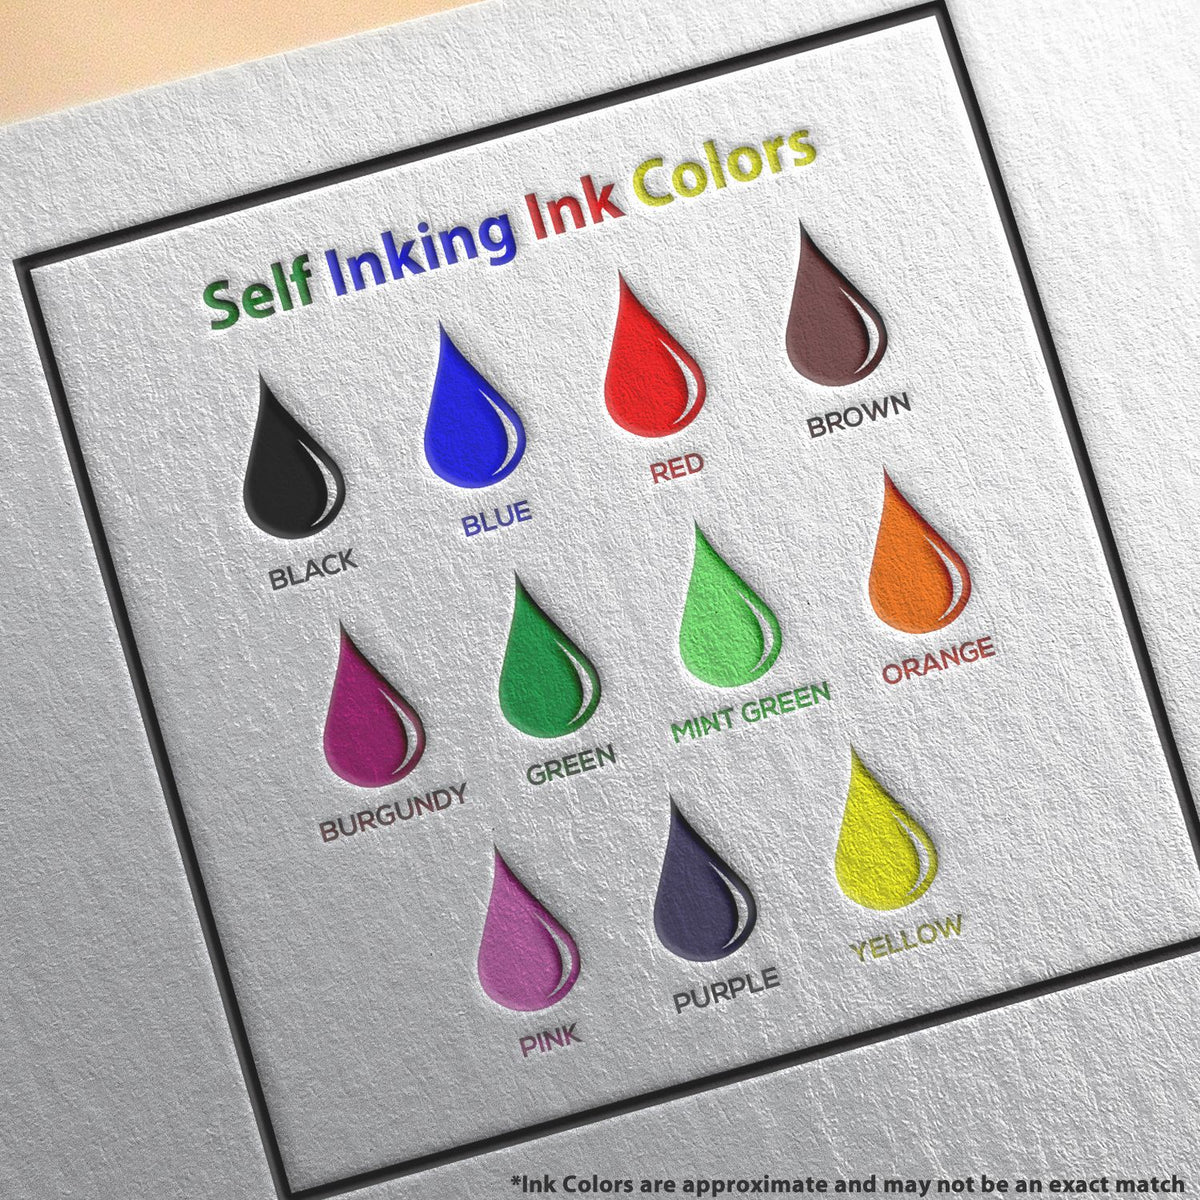 A picture showing the different ink colors or hues available for the Self-Inking Rectangular Maryland Notary Stamp product.